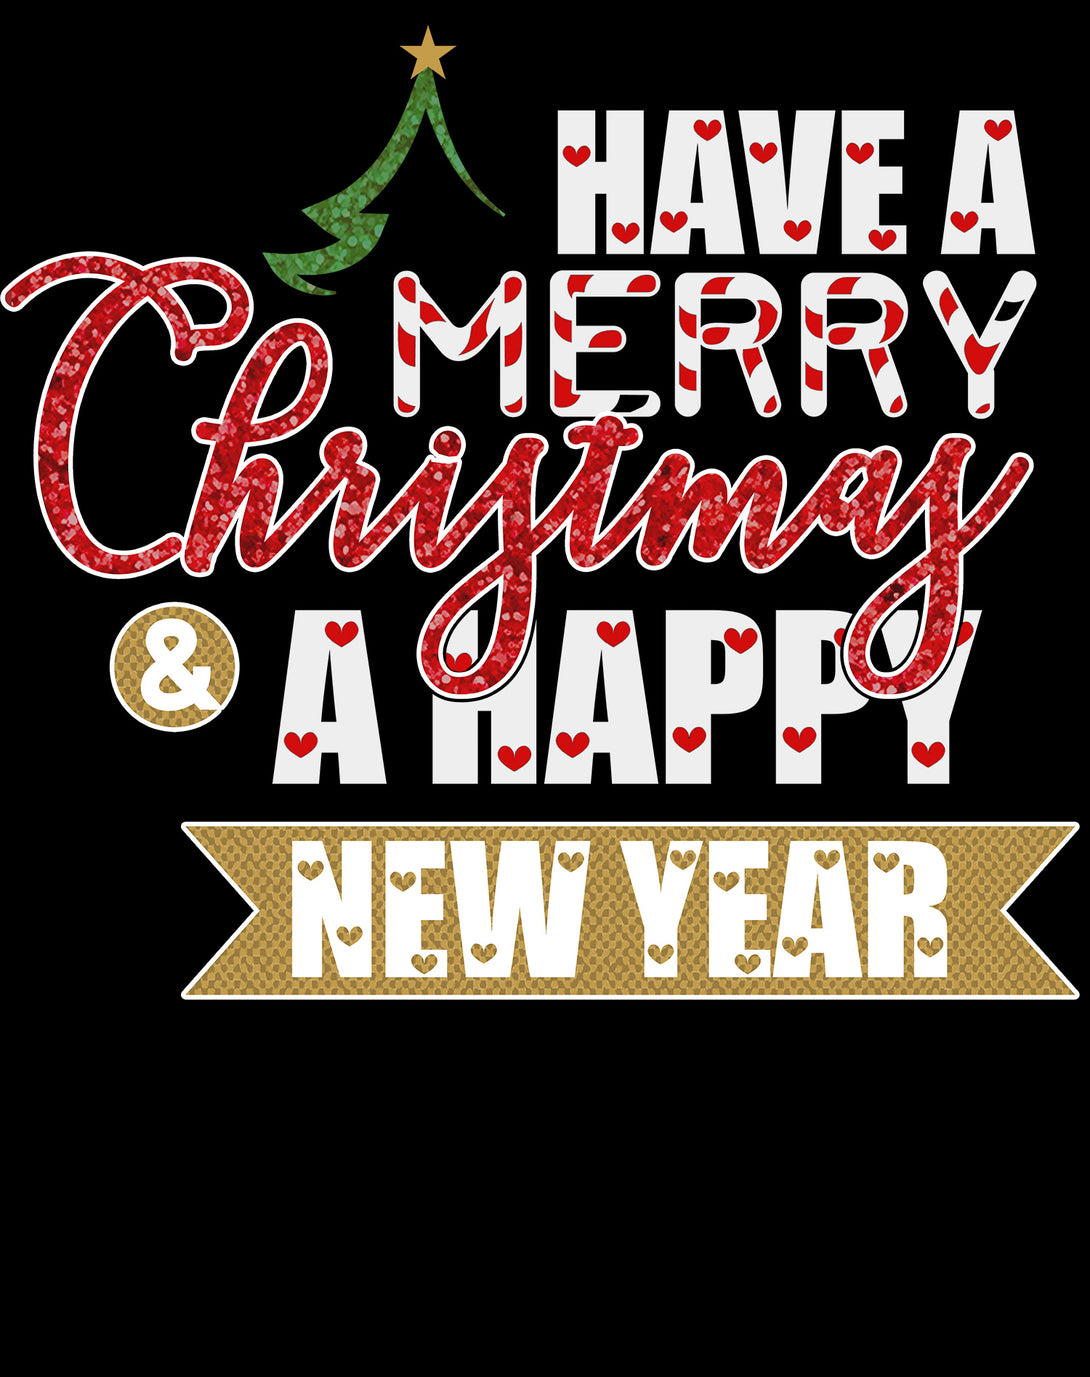 NYE Merry Christmas Happy New Year Hearts Party Xmas Eve Men's T-Shirt Black - Urban Species Design Close Up